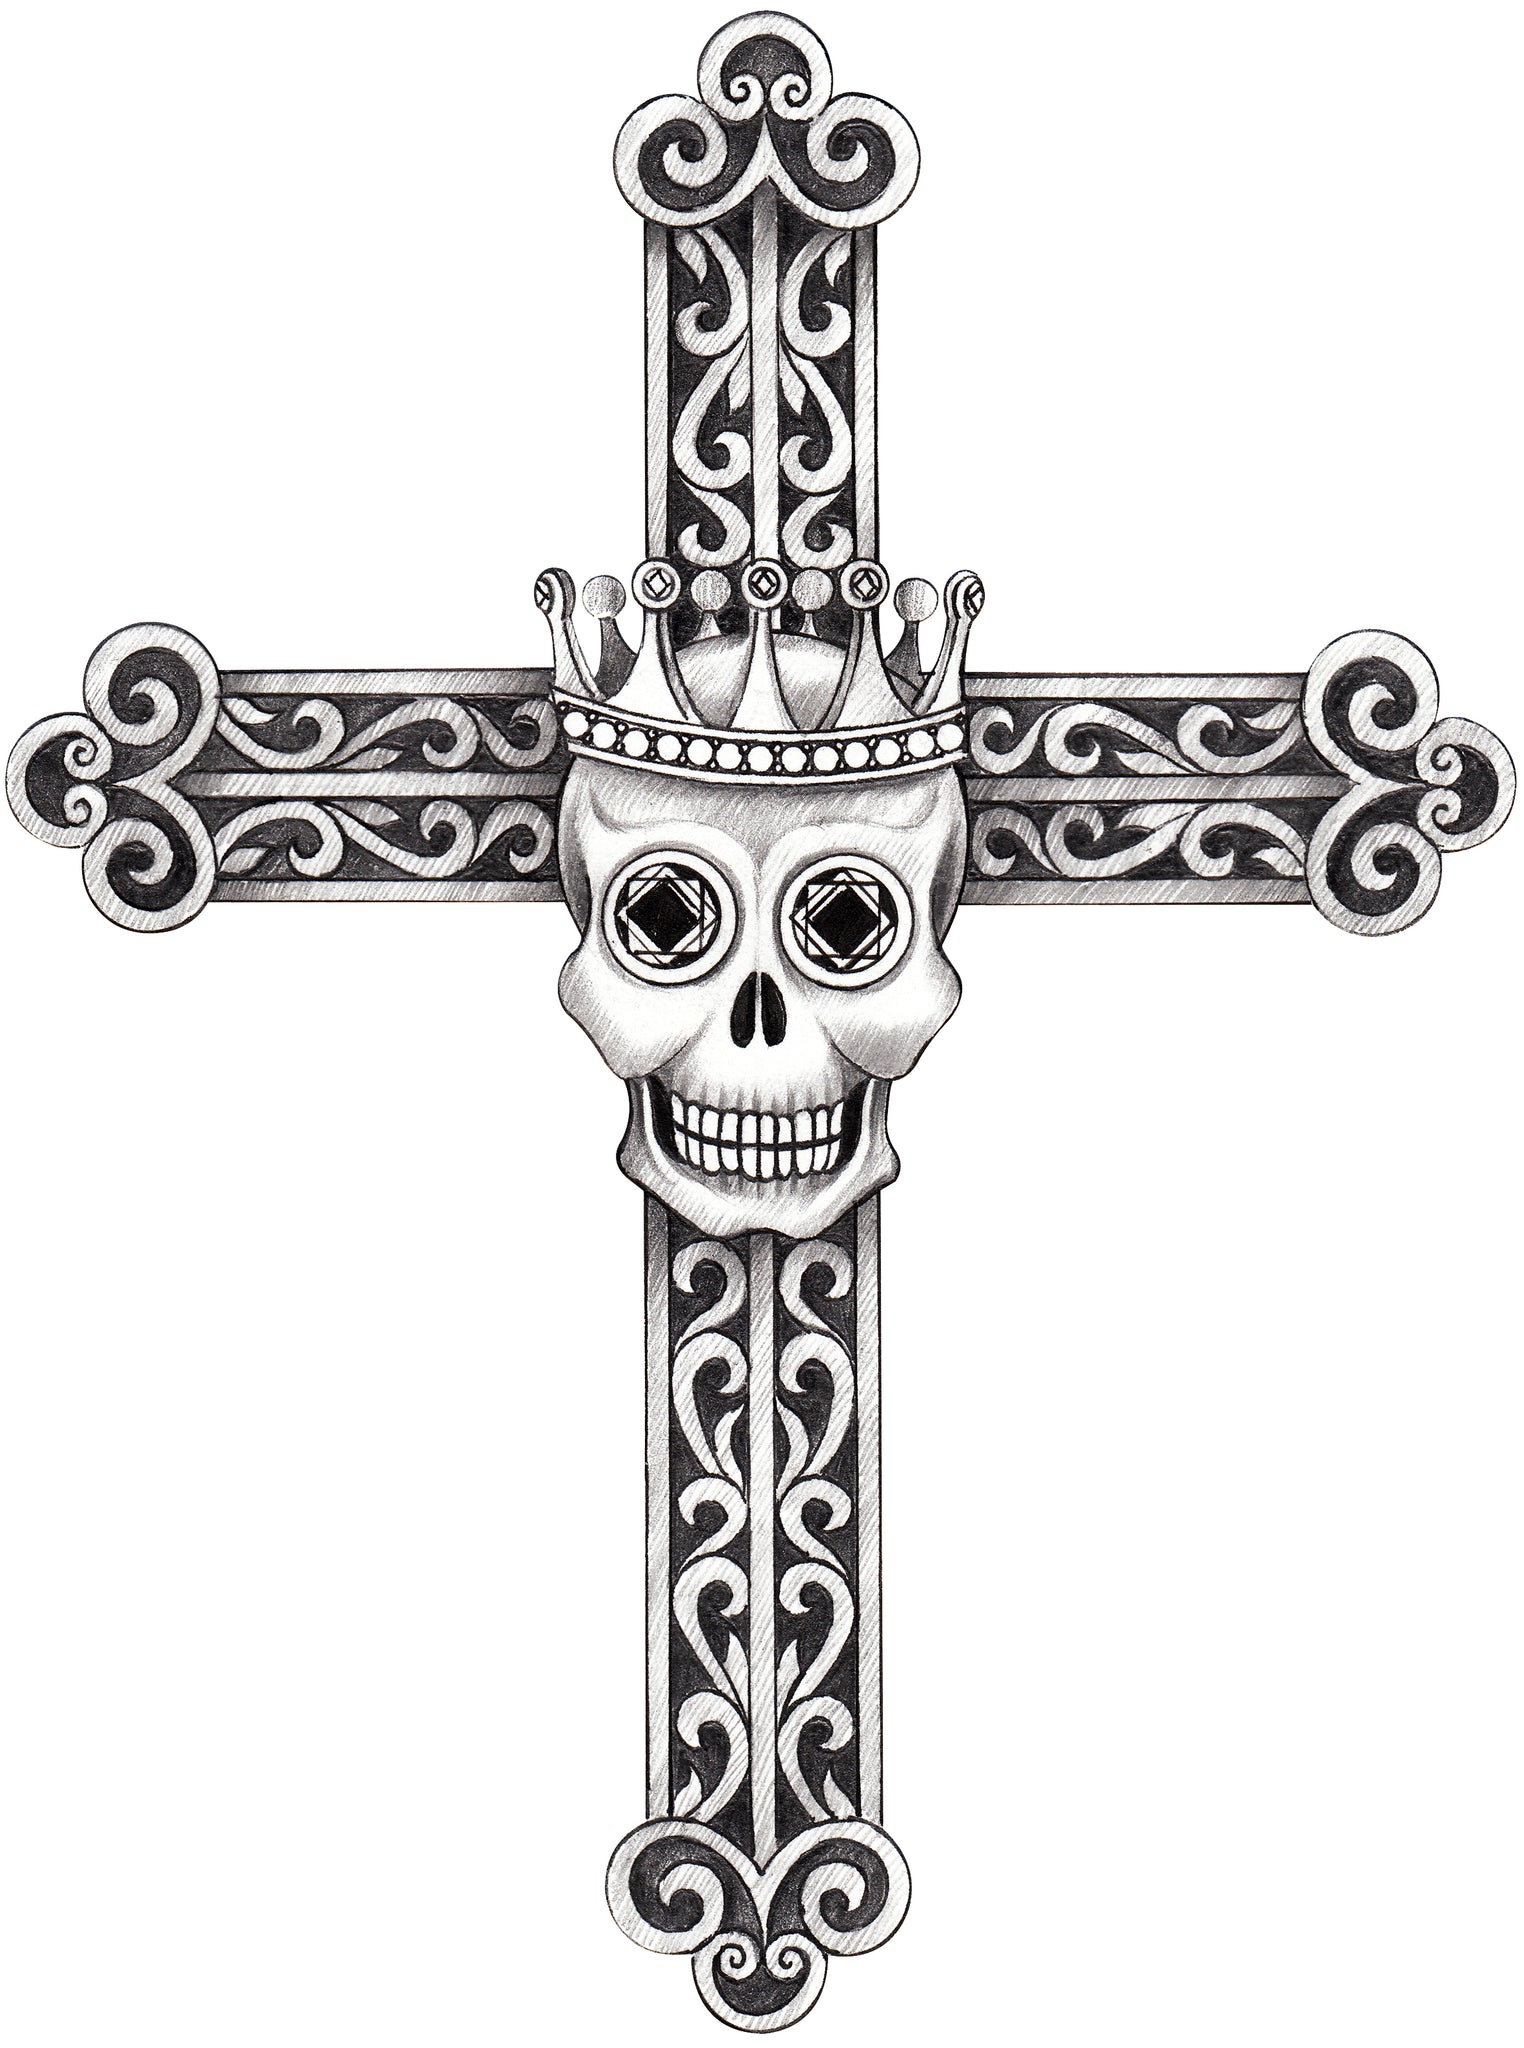 Pencil Sketch Gothic Cross with Skull #1 Vinyl Decal Sticker